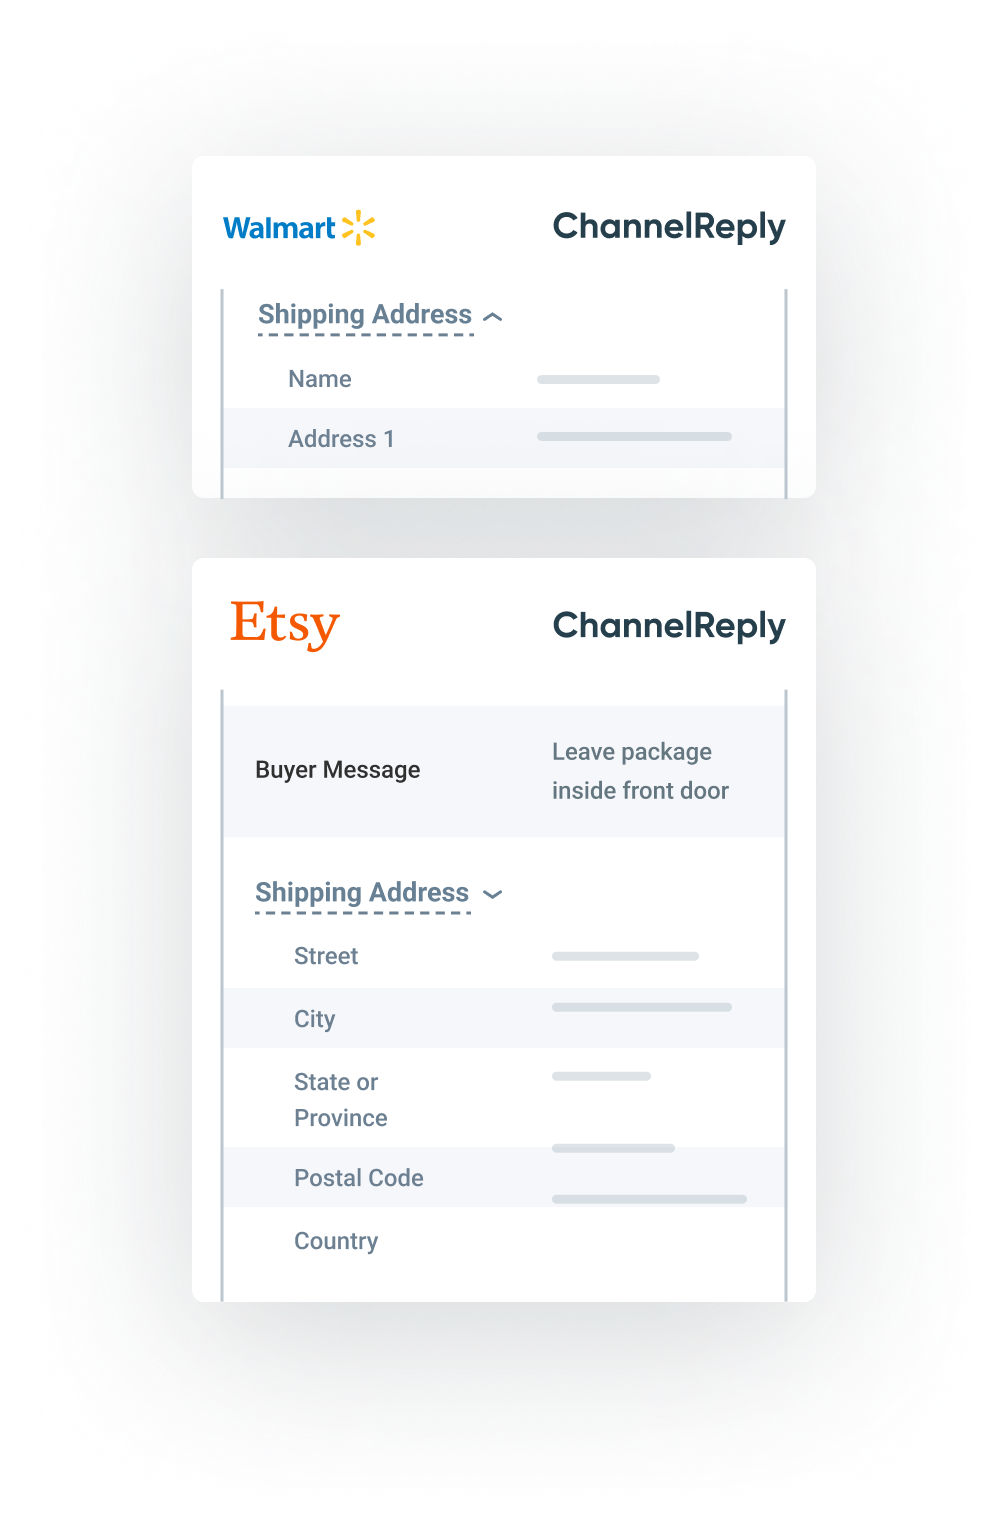 Illustration of Walmart and Etsy Shipping Addresses in ChannelReply